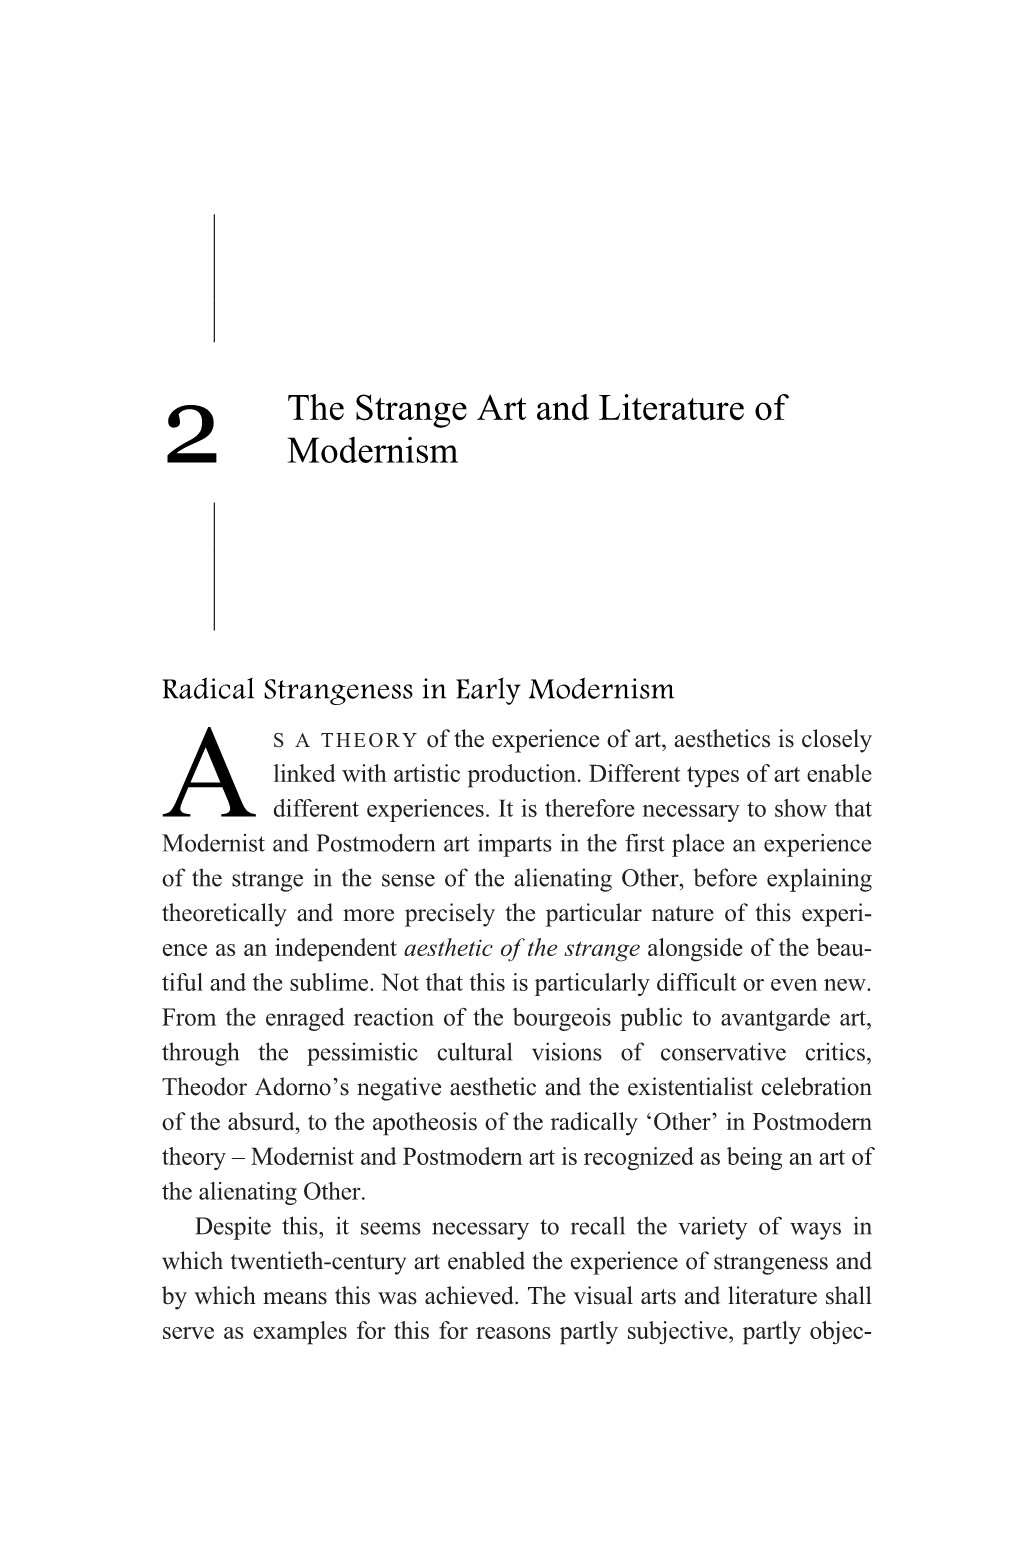 The Strange Art and Literature of Modernism